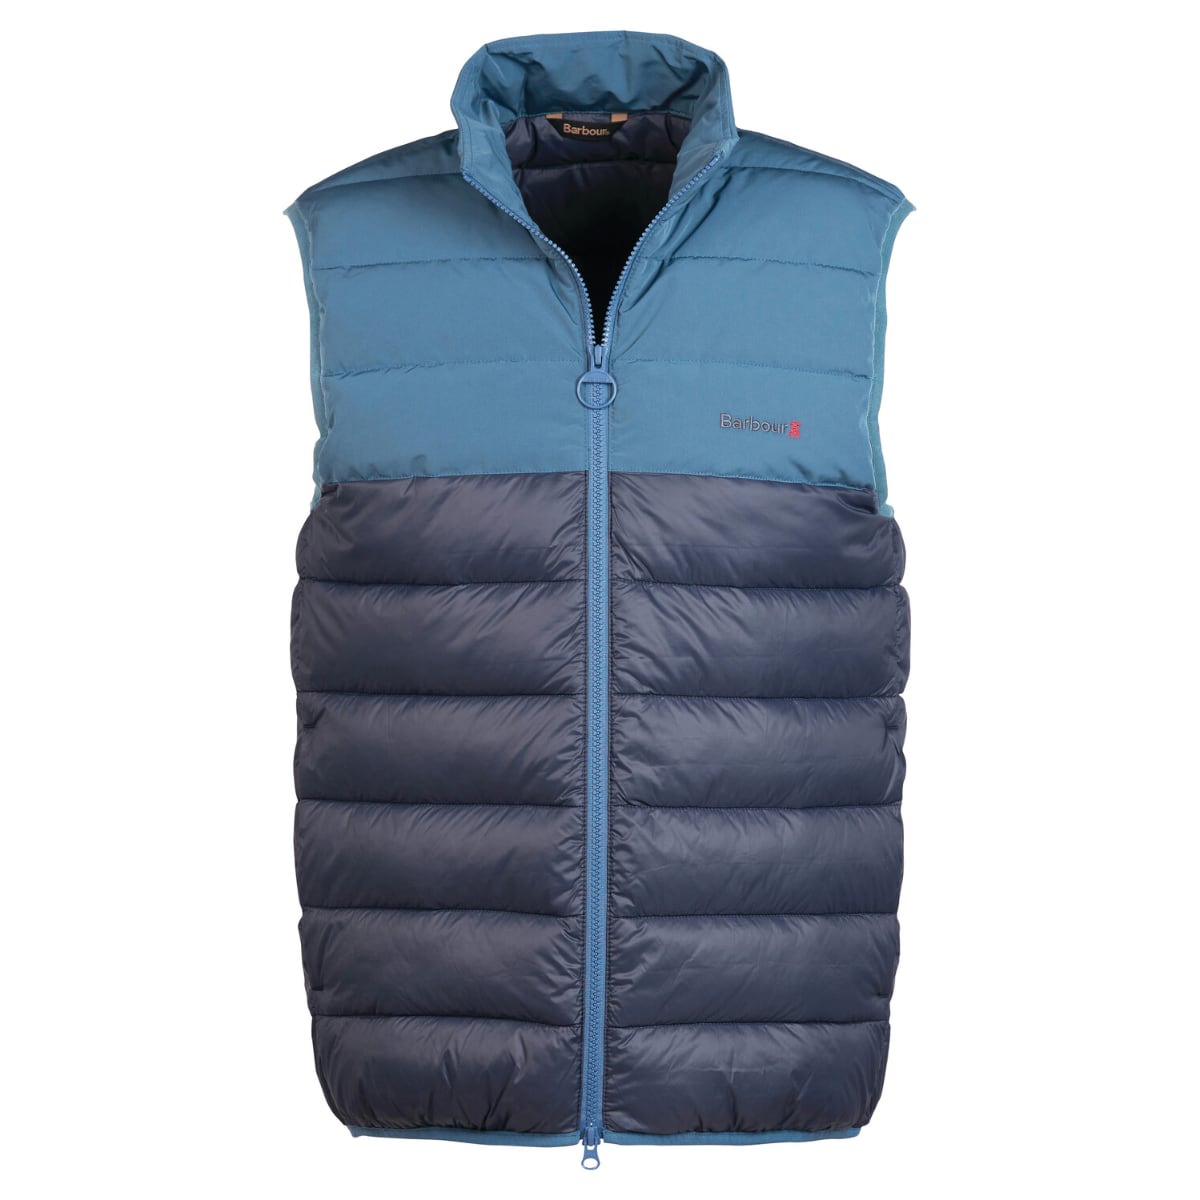 Barbour Heburn Quilted Men's Gilet | Bearing Sea – Allweathers